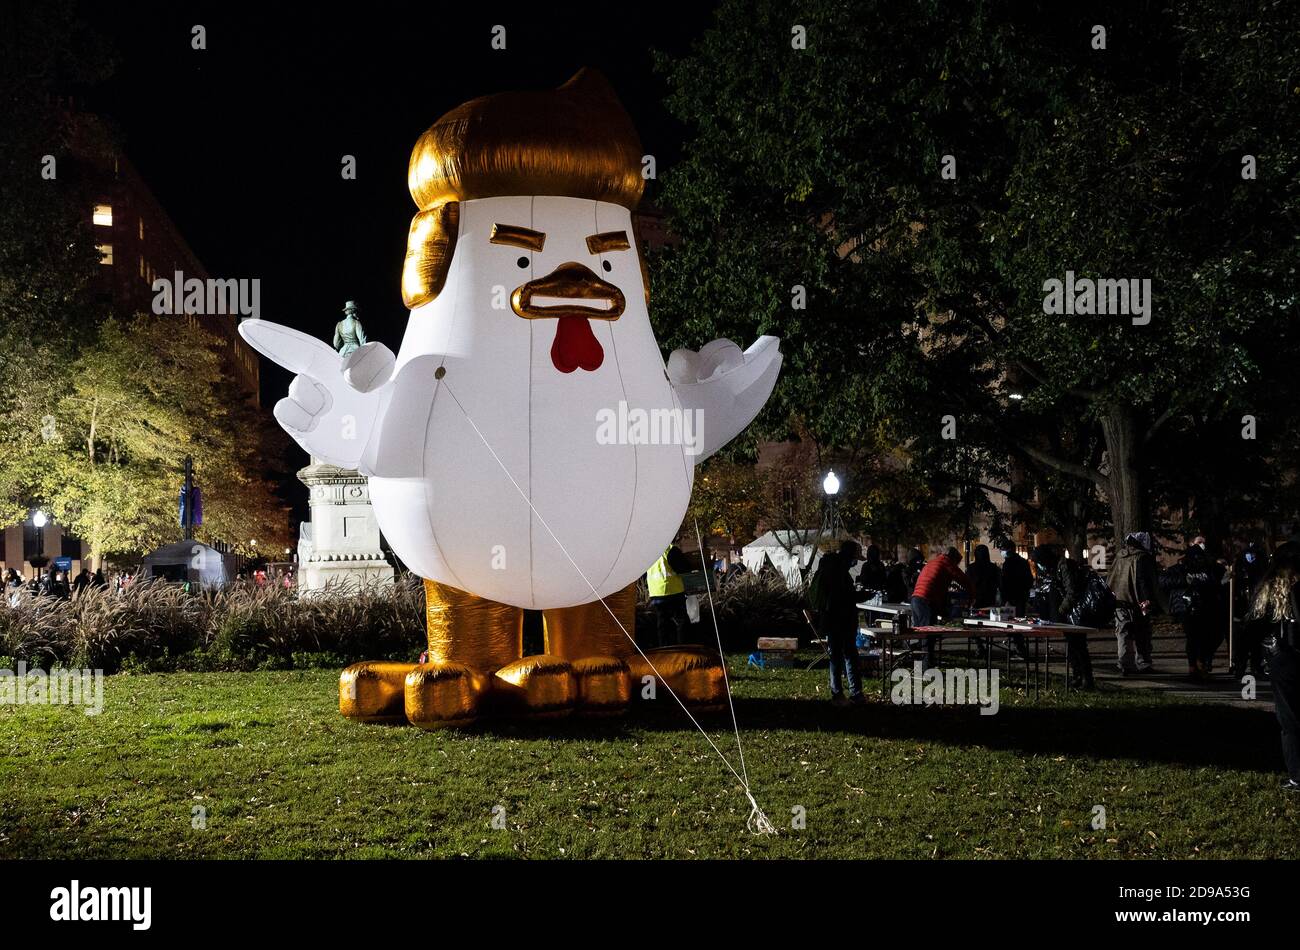 November 3, 2020 - Washington, DC, United States: A large Trump Chicken balloon near an election night watch party in McPherson Square. (Photo by Michael Brochstein/Sipa USA) Stock Photo